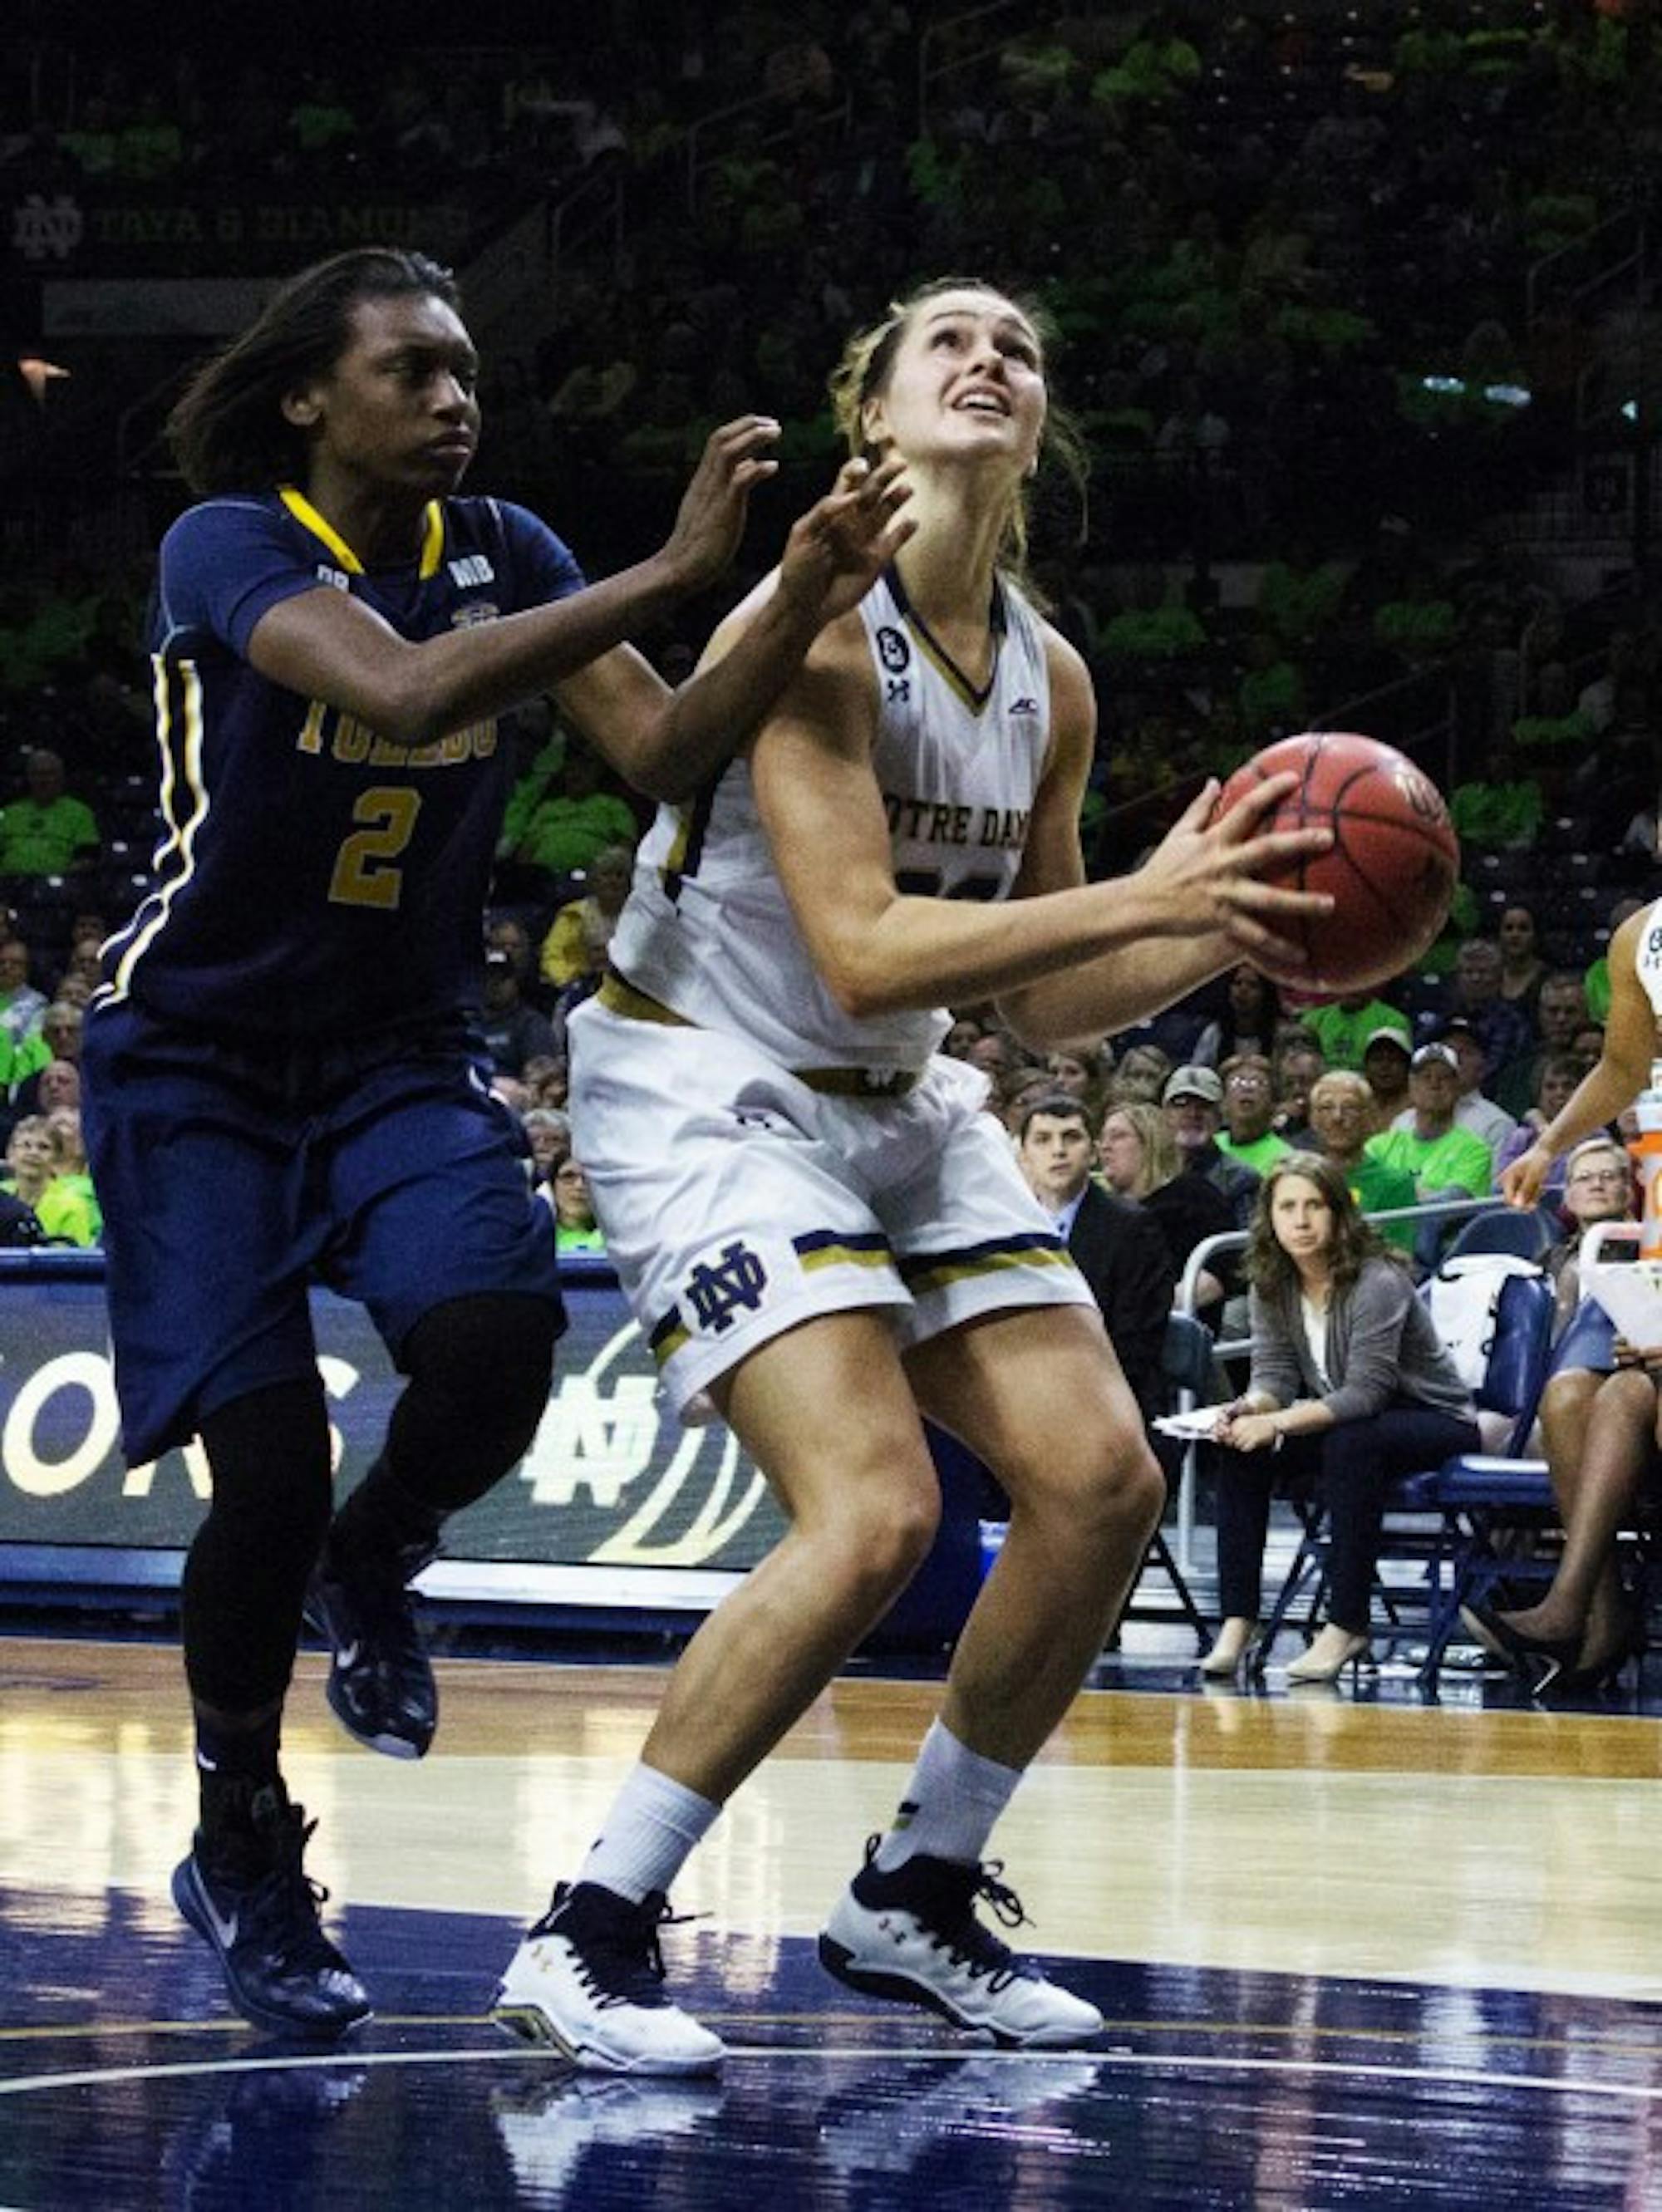 Sophomore forward Kathryn Westbeld looks for a shot during Notre Dame’s 74-39 victory over Toledo on Wednesday night.